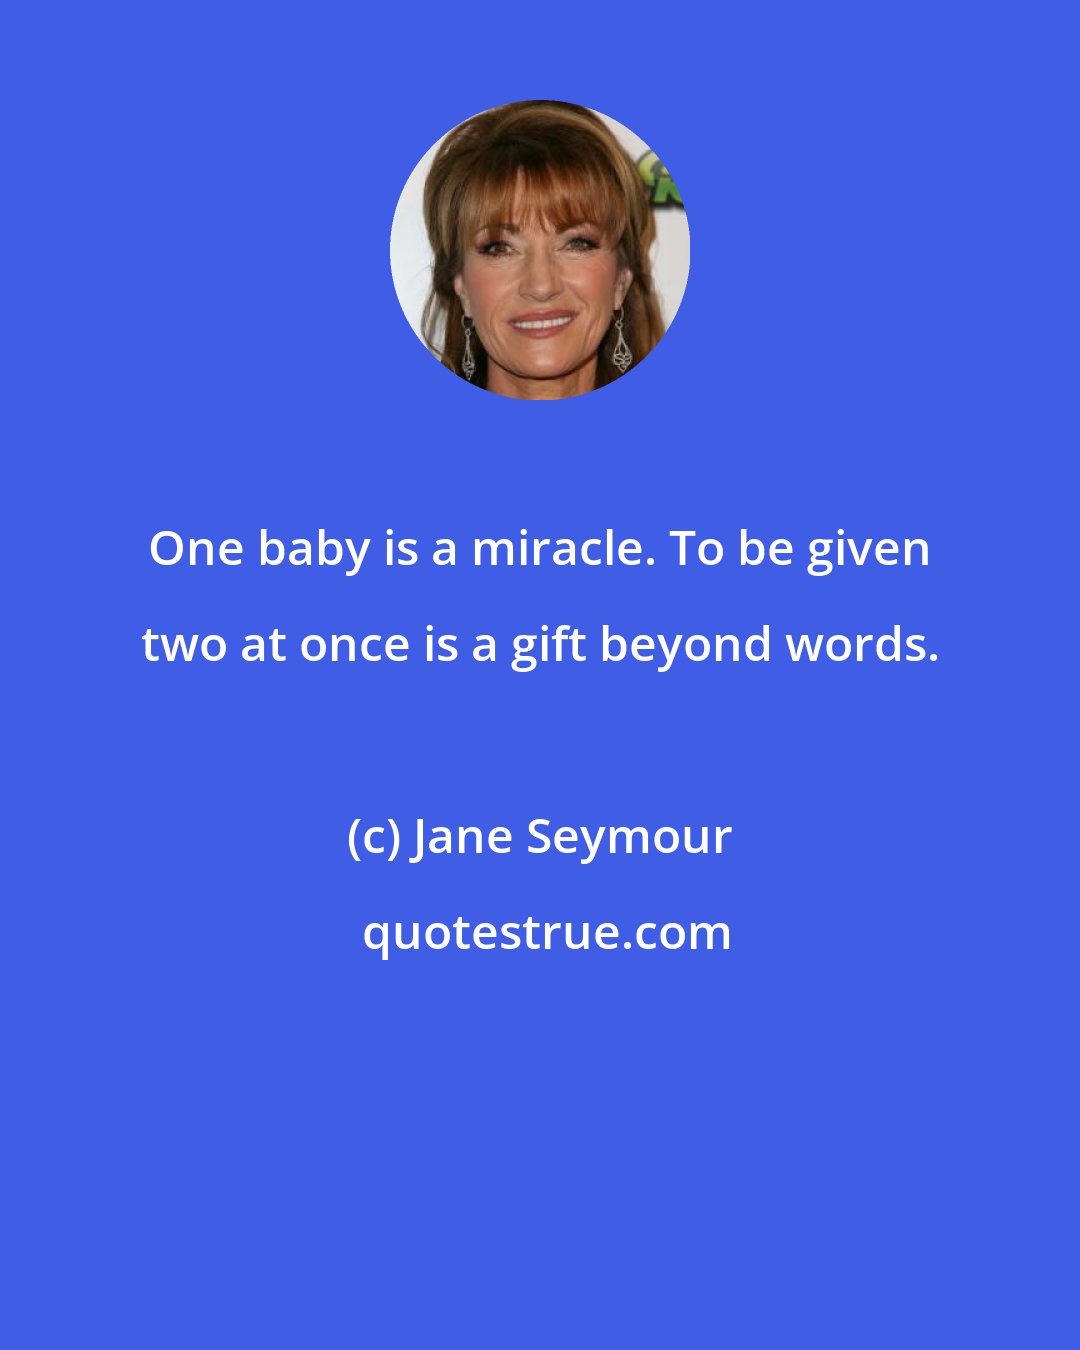 Jane Seymour: One baby is a miracle. To be given two at once is a gift beyond words.